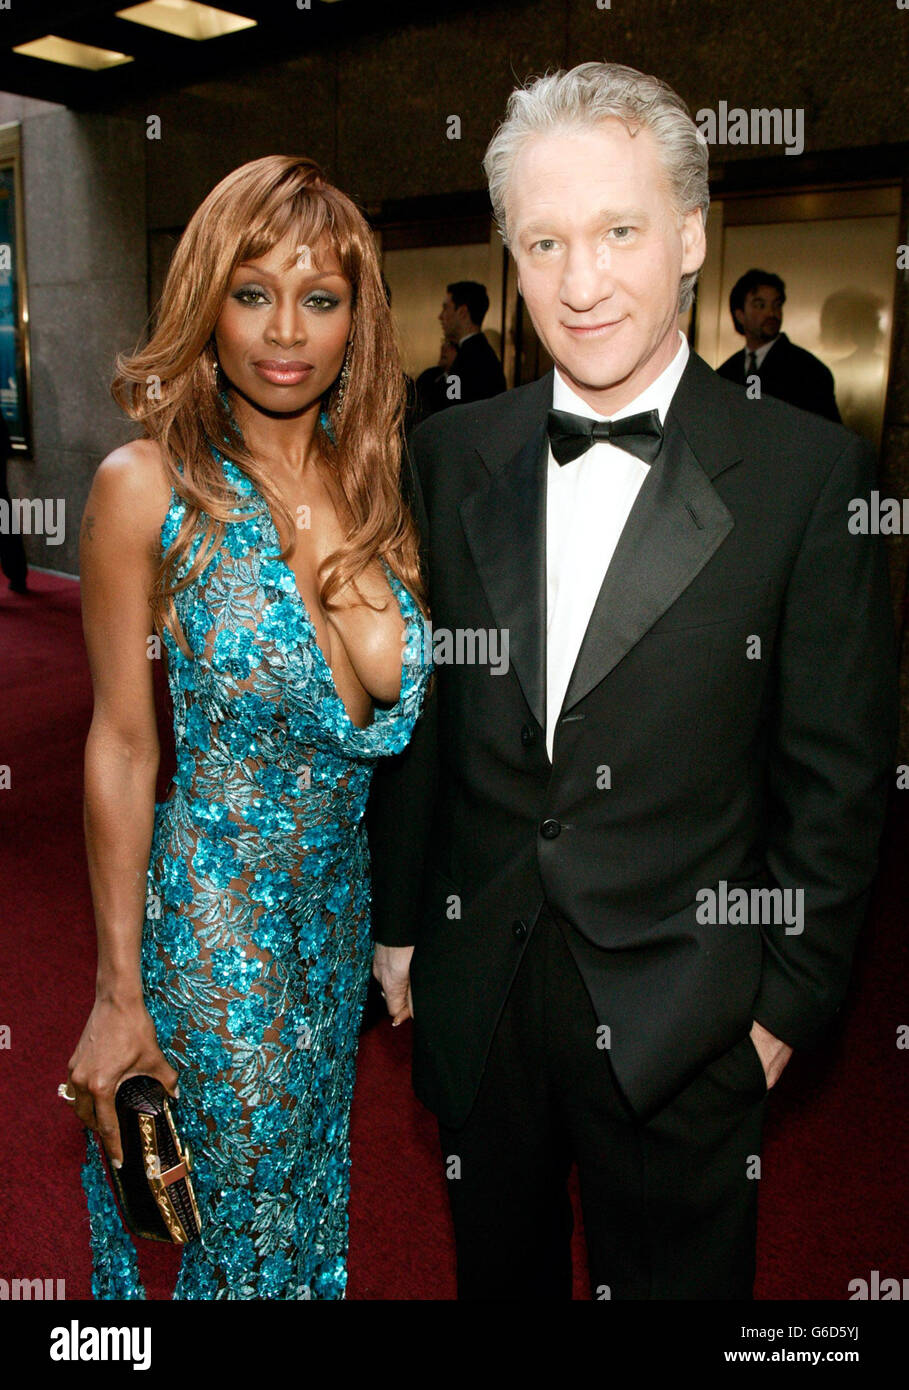 Bill Maher and girlfriend Coco arrive at the 2003 Tony Awards at Radio City Music Hall in New York City. Stock Photo